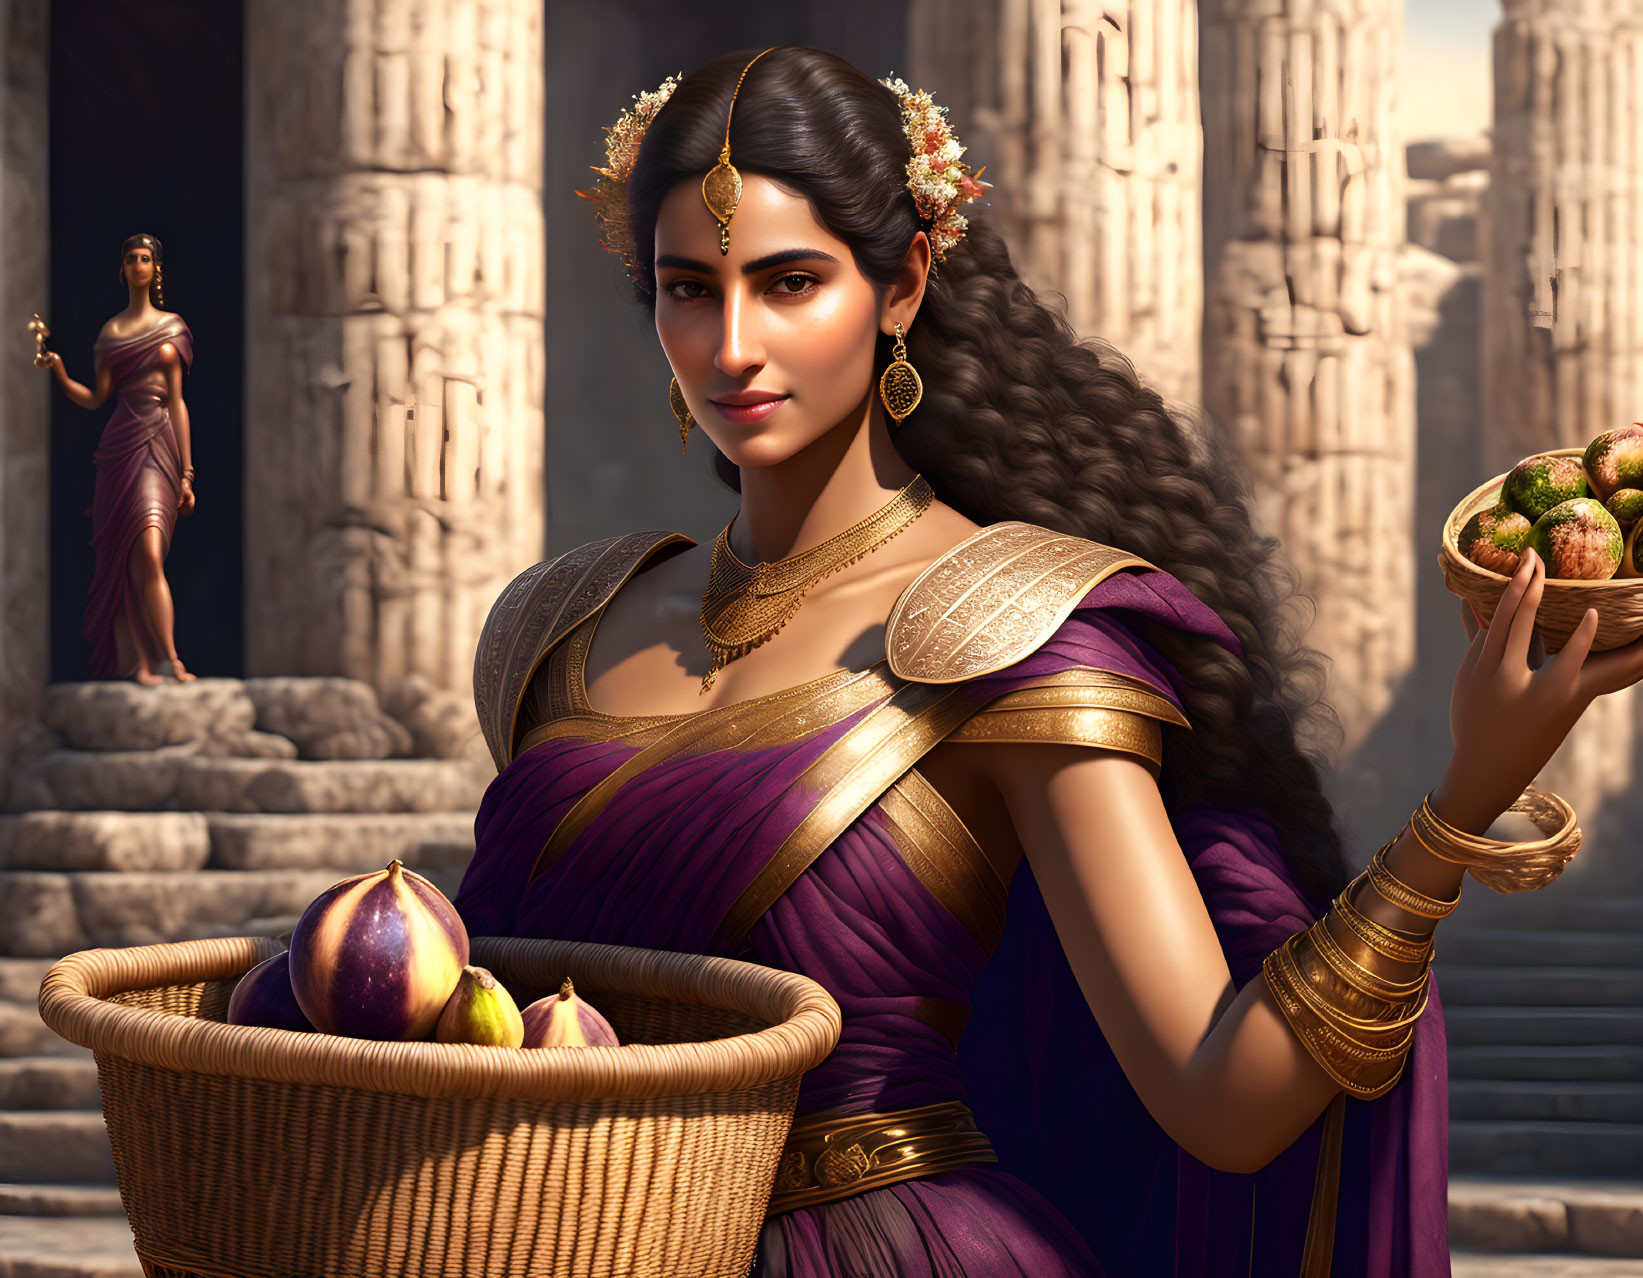 Digital artwork of woman in ancient regal attire with fruit basket against classical architecture